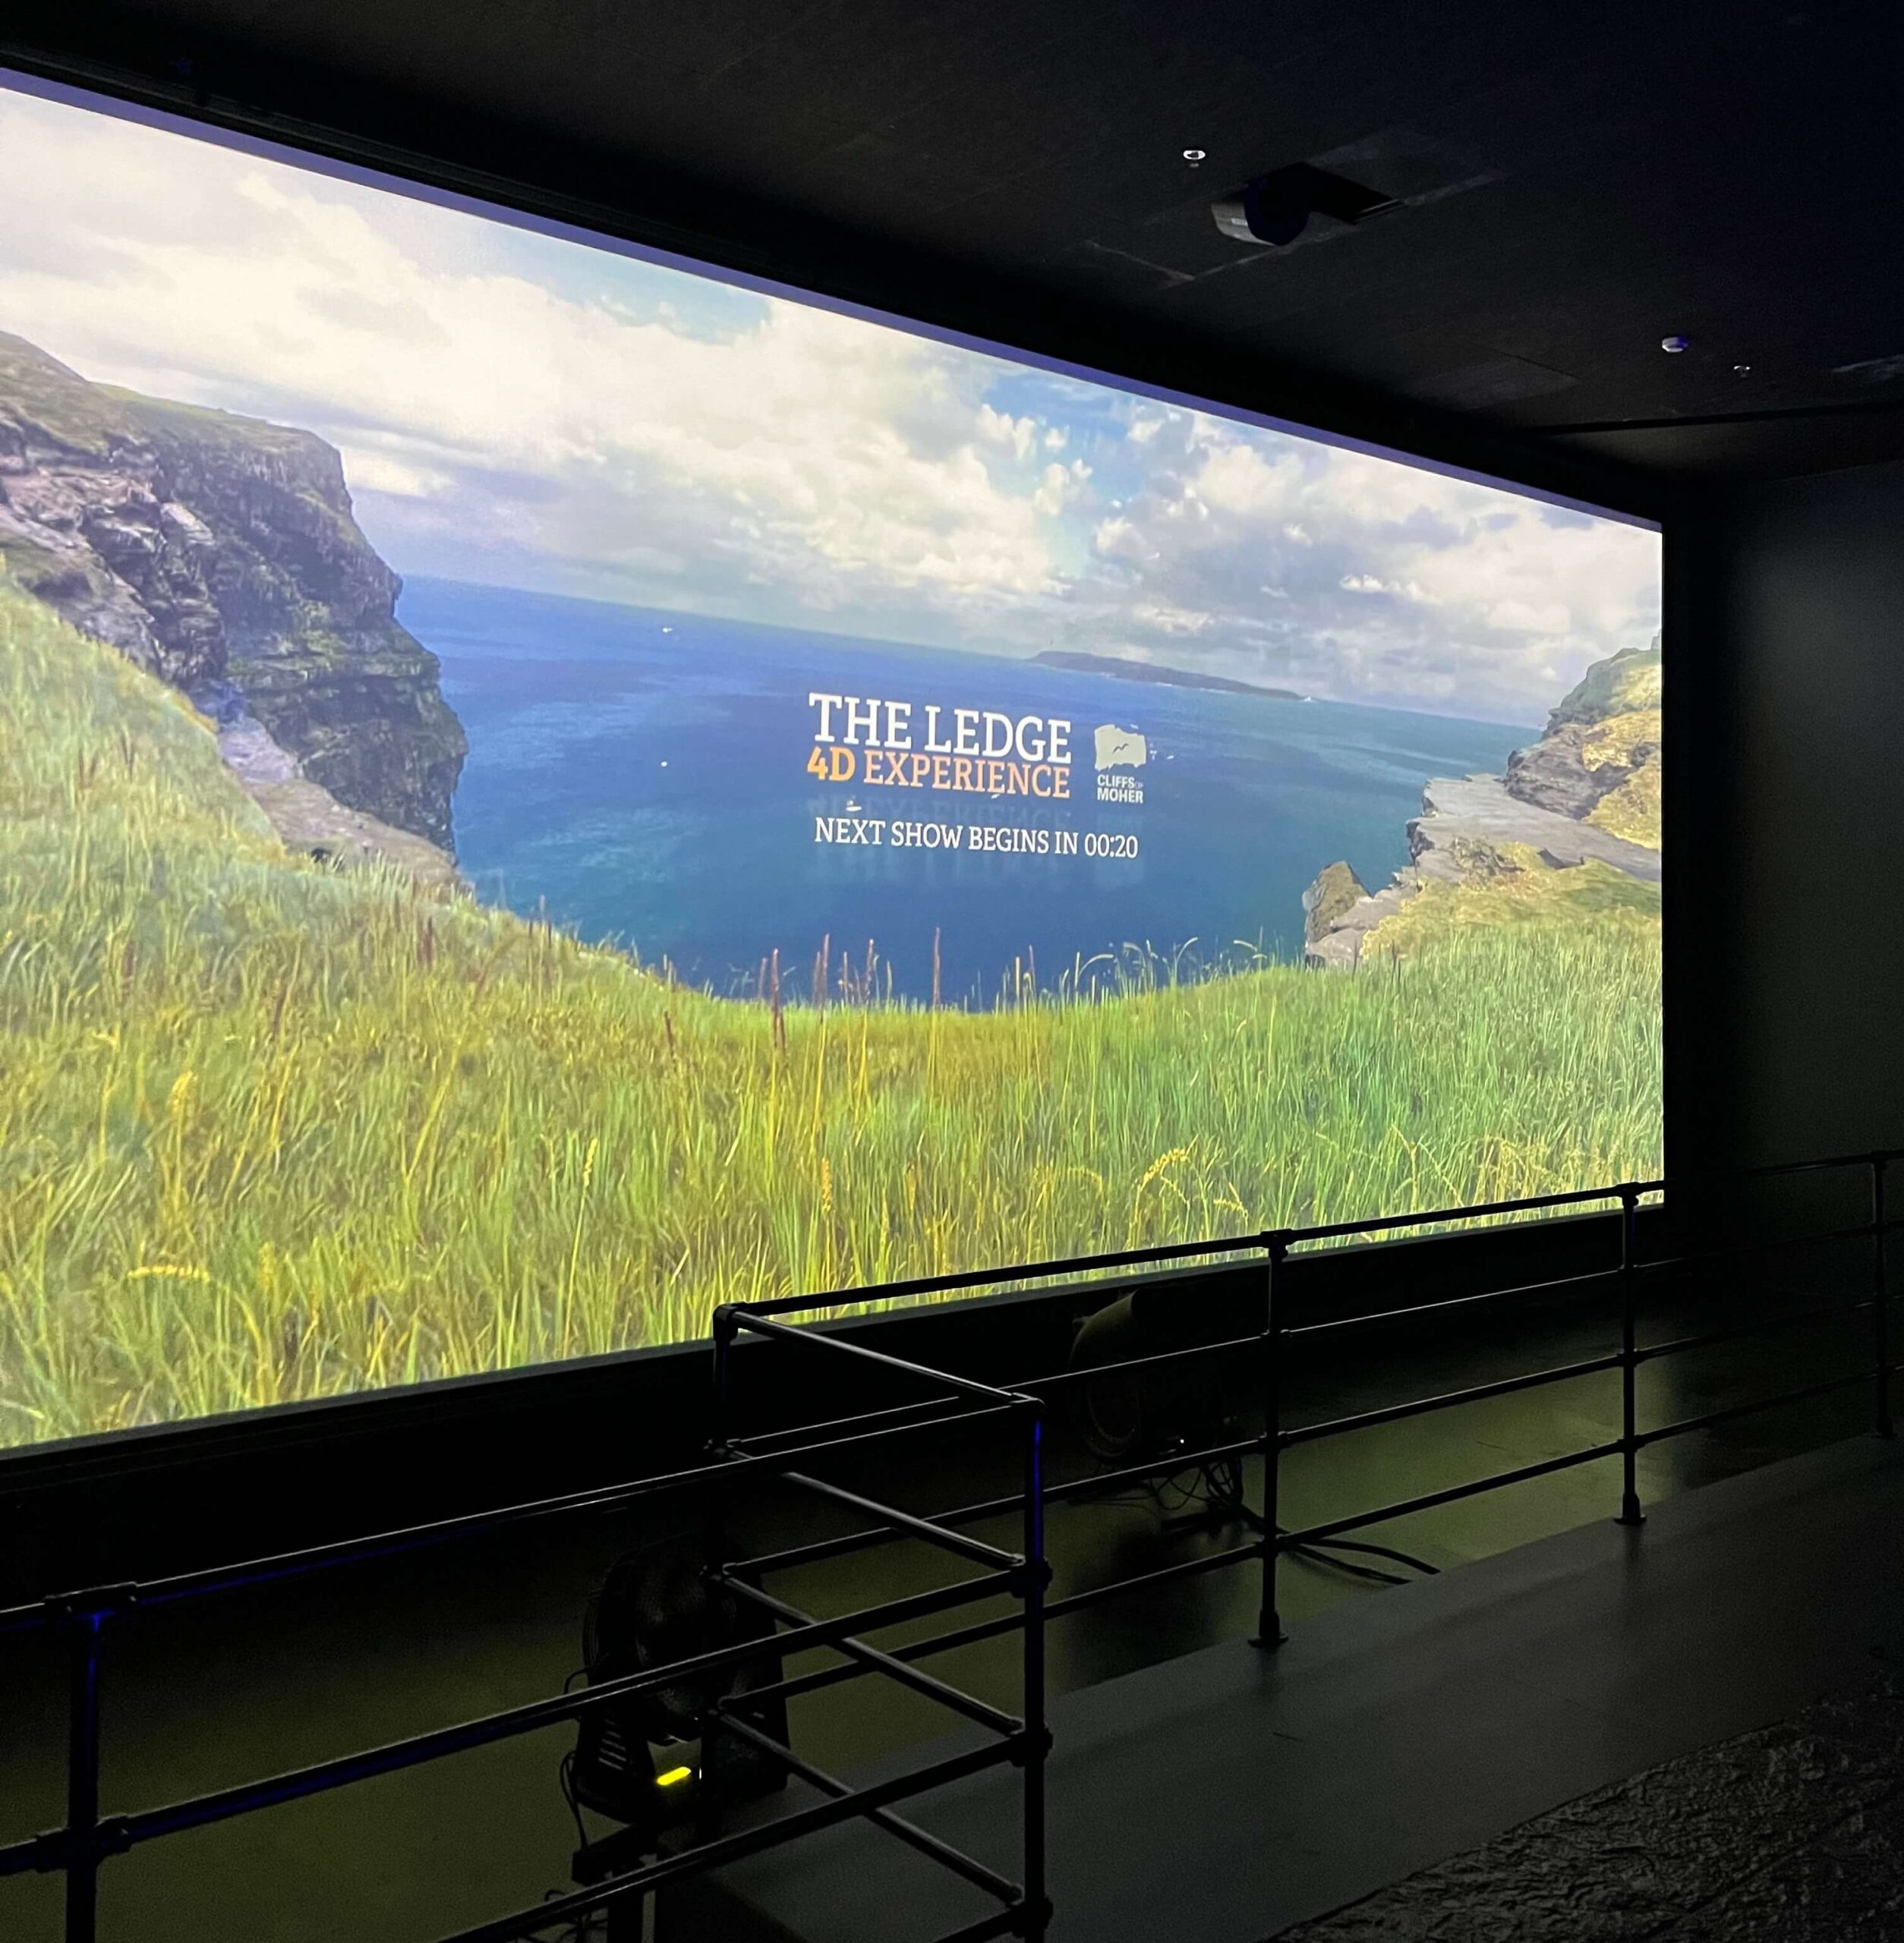 The 4D Ledge Experience at the Cliffs of Moher